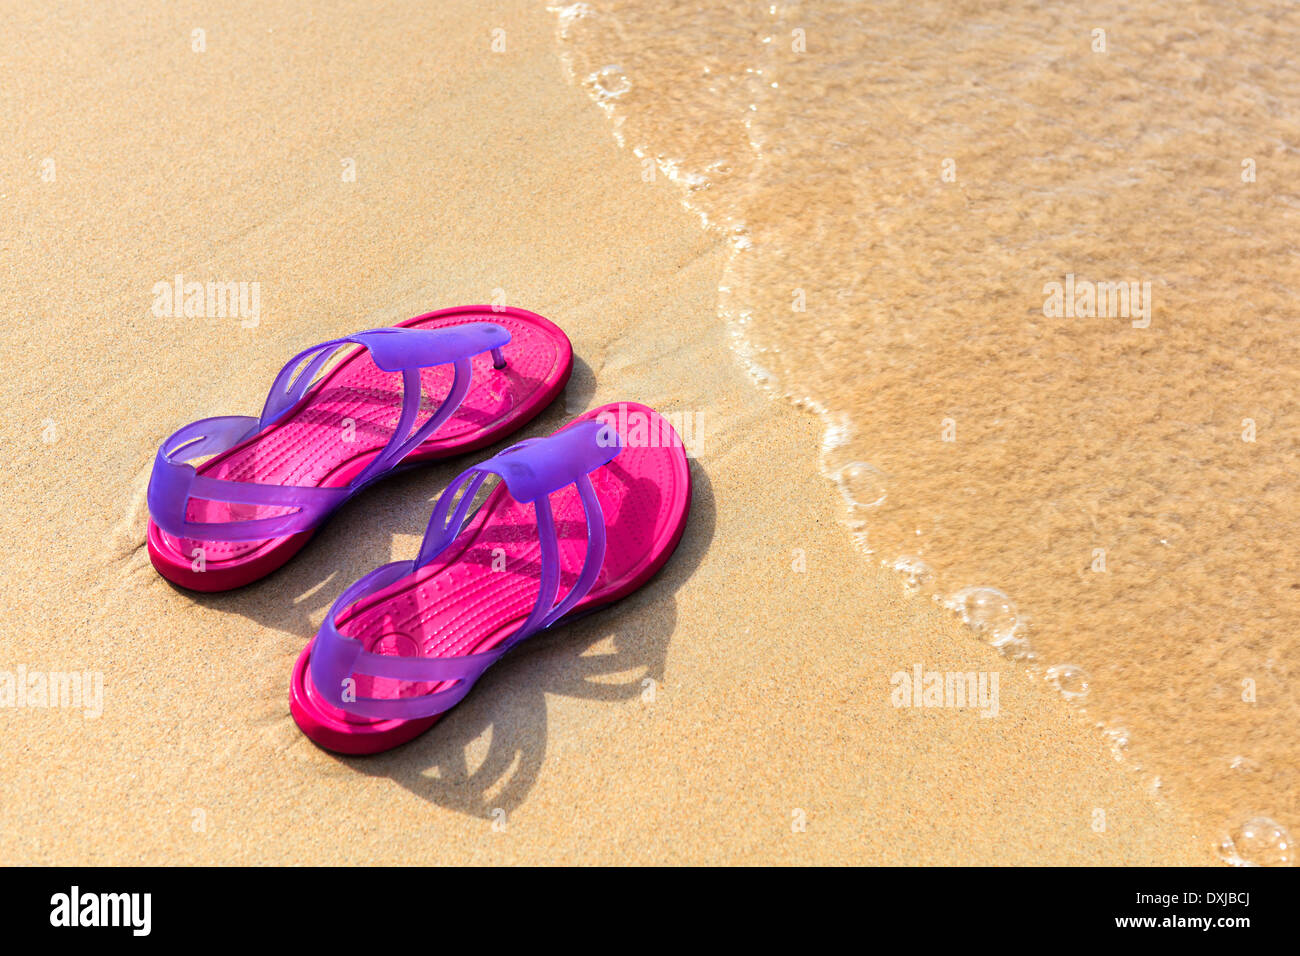 Sandals on the beach - concept image Stock Photo - Alamy